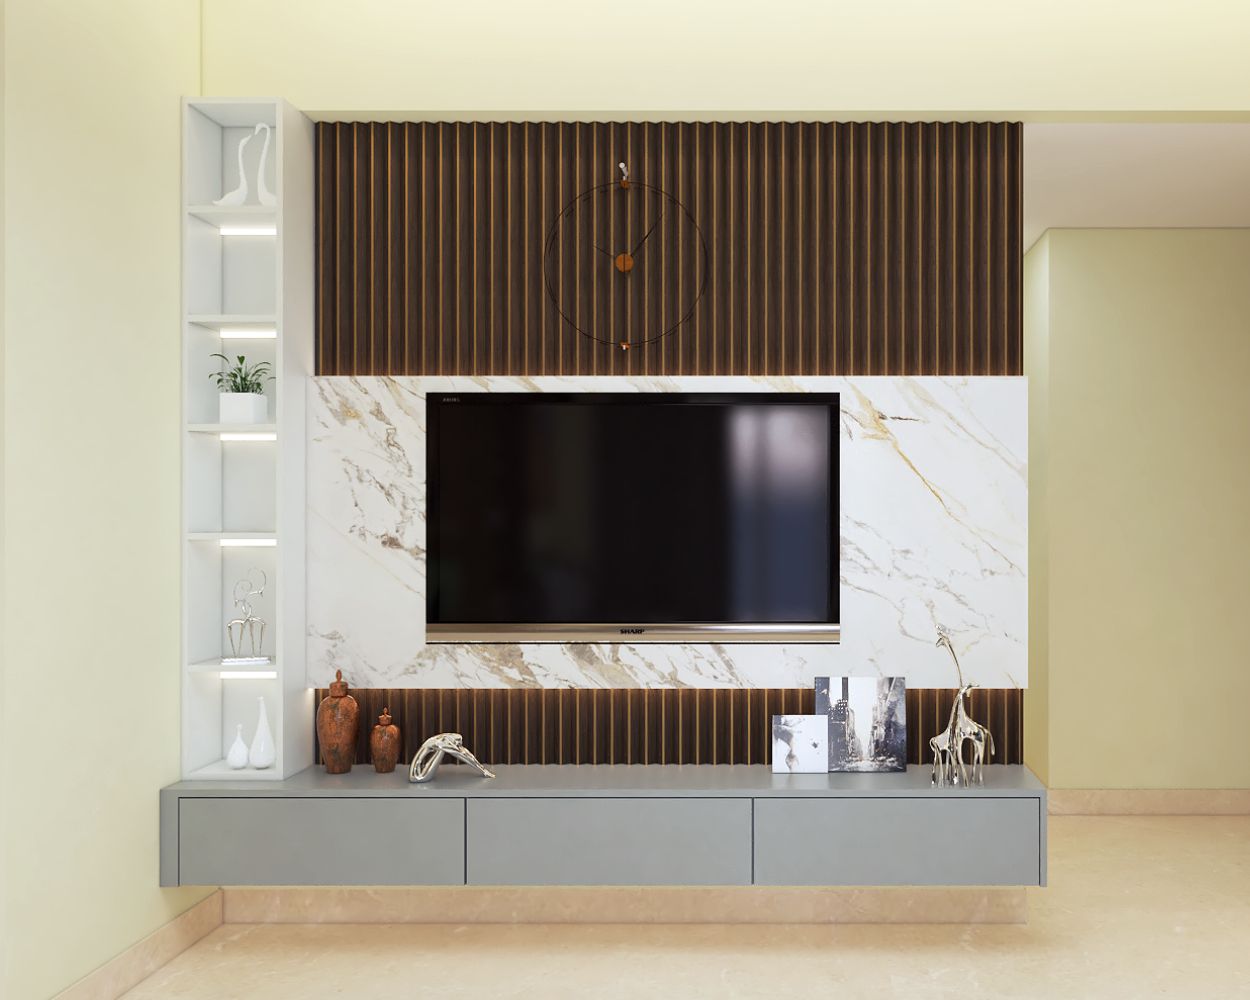 Grey And White Modern TV Unit Design Wth Wooden Fluted Panelling And White Marble Accent Wall